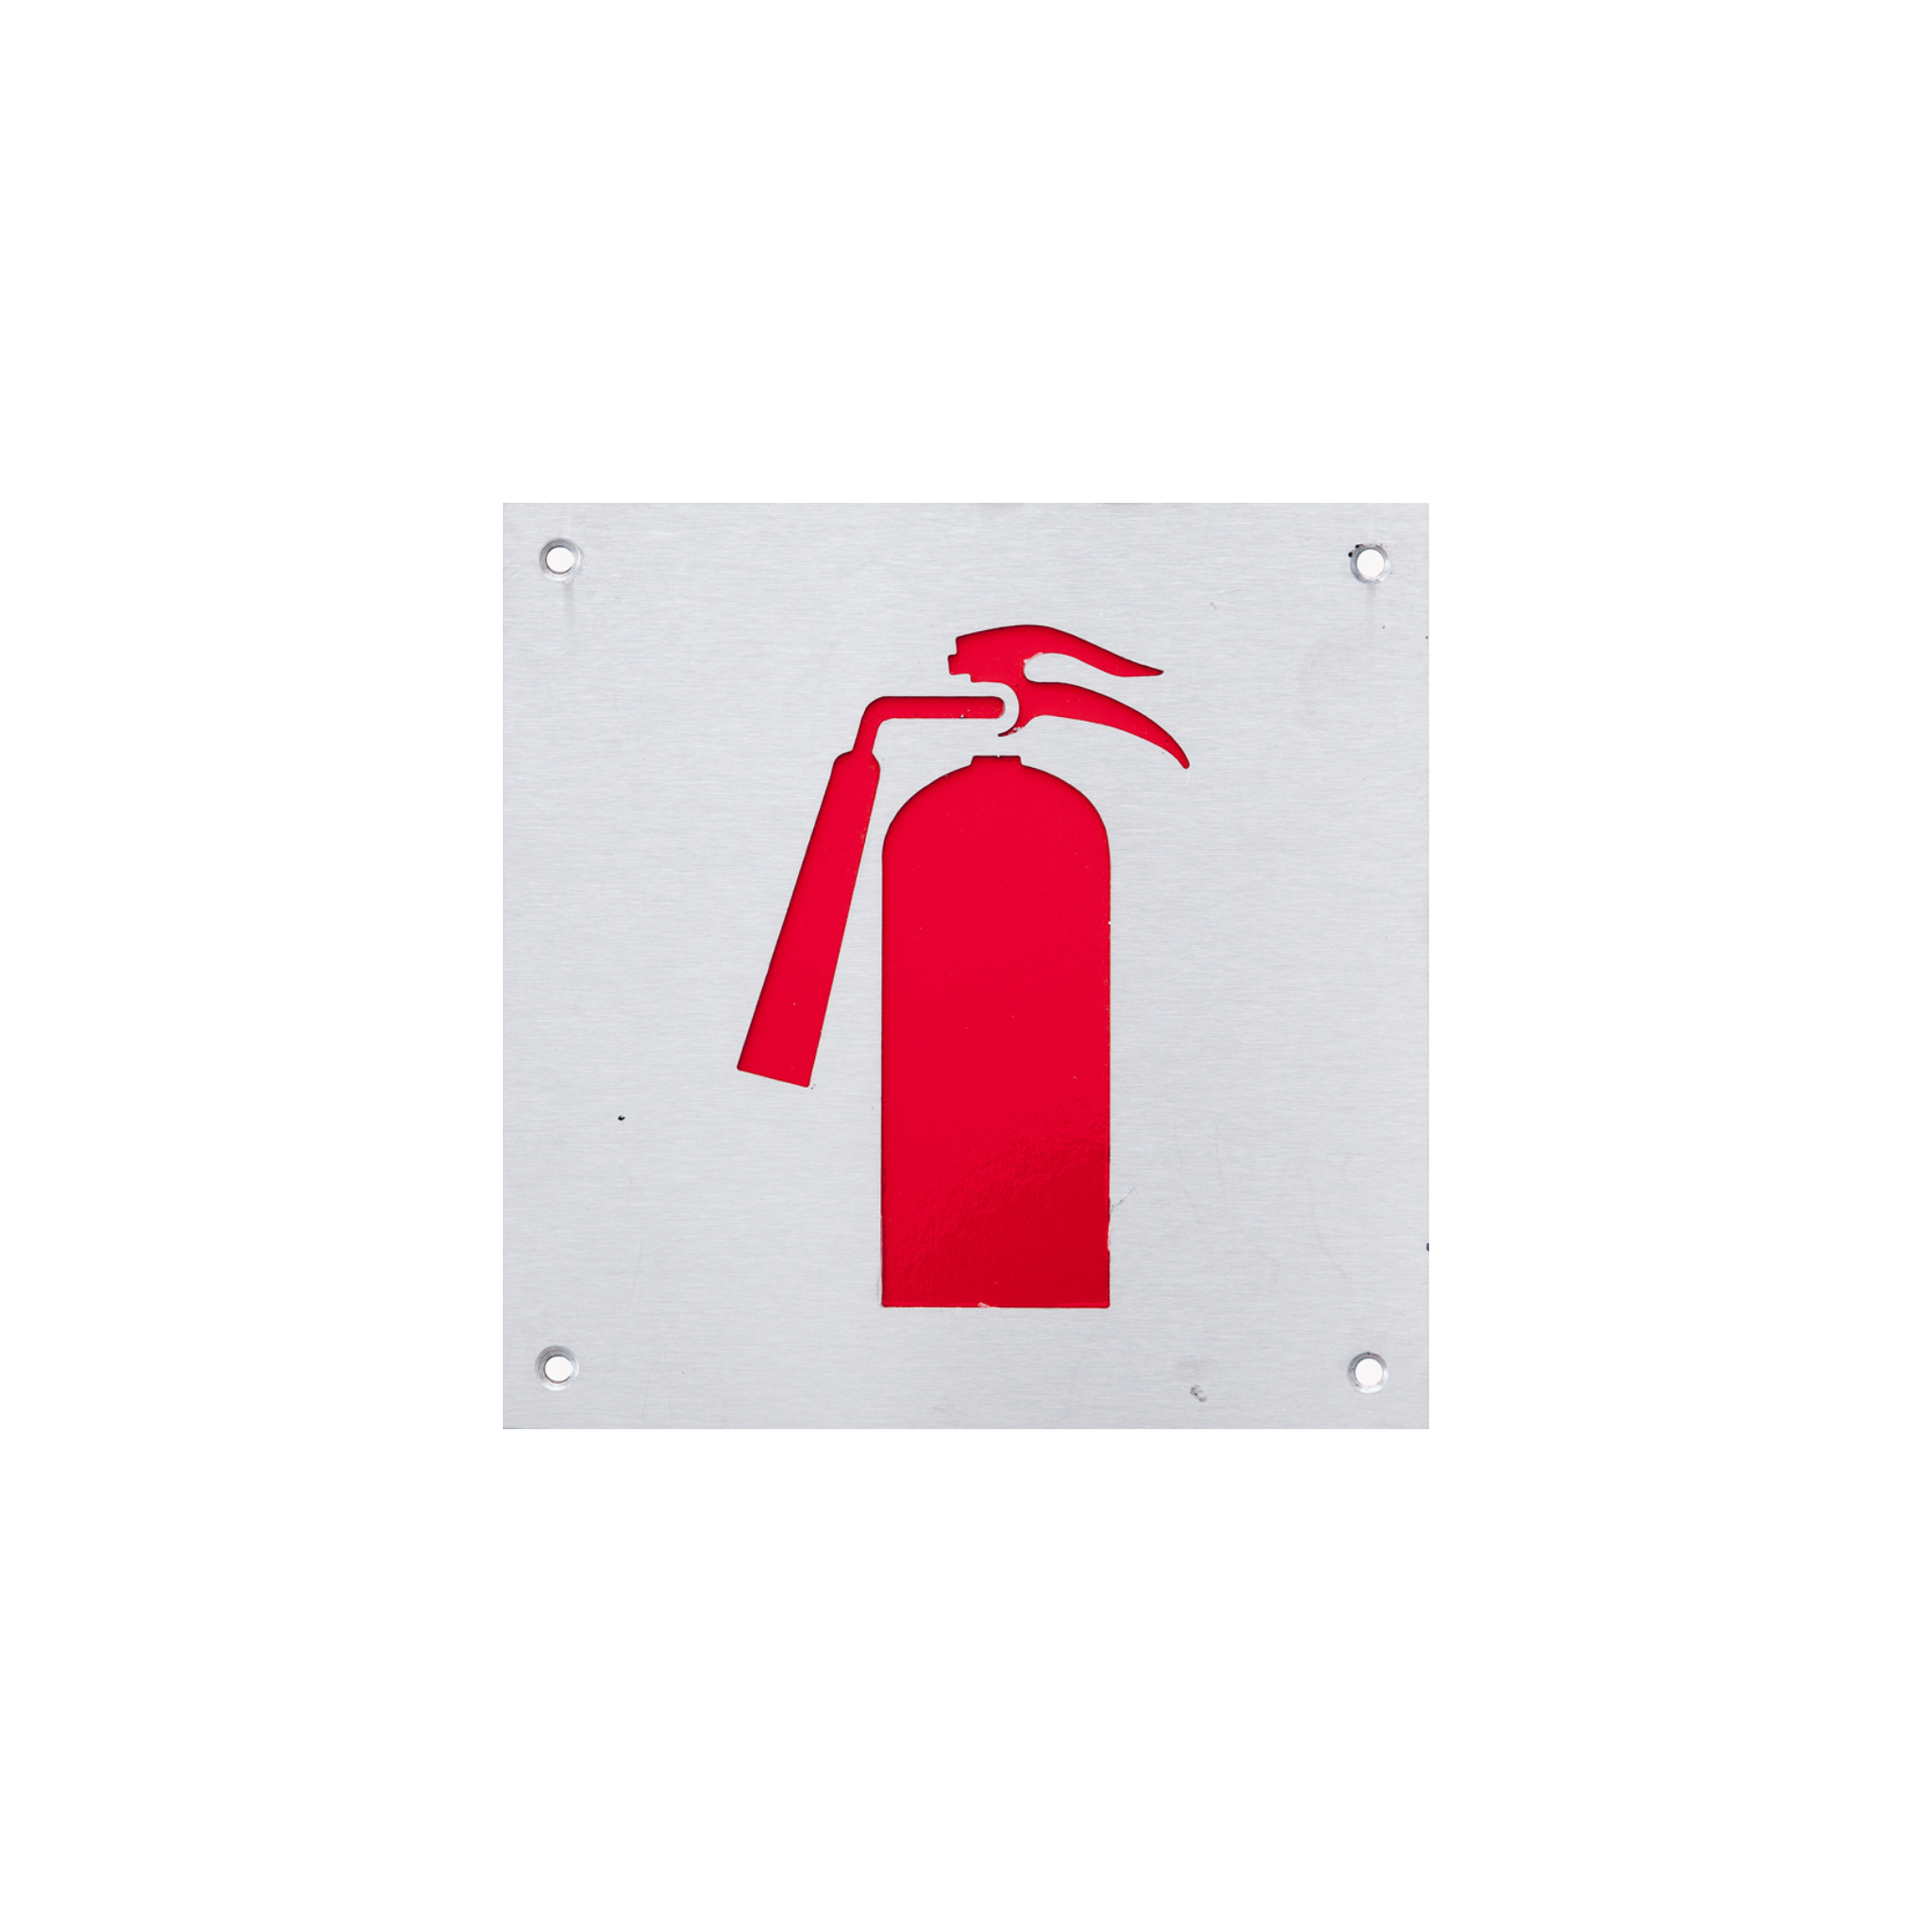 DSS-146, Door Signage, Fire Extinguisher , 150mm (l), 150mm (w), 1,2mm (t), Stainless Steel, DORMAKABA